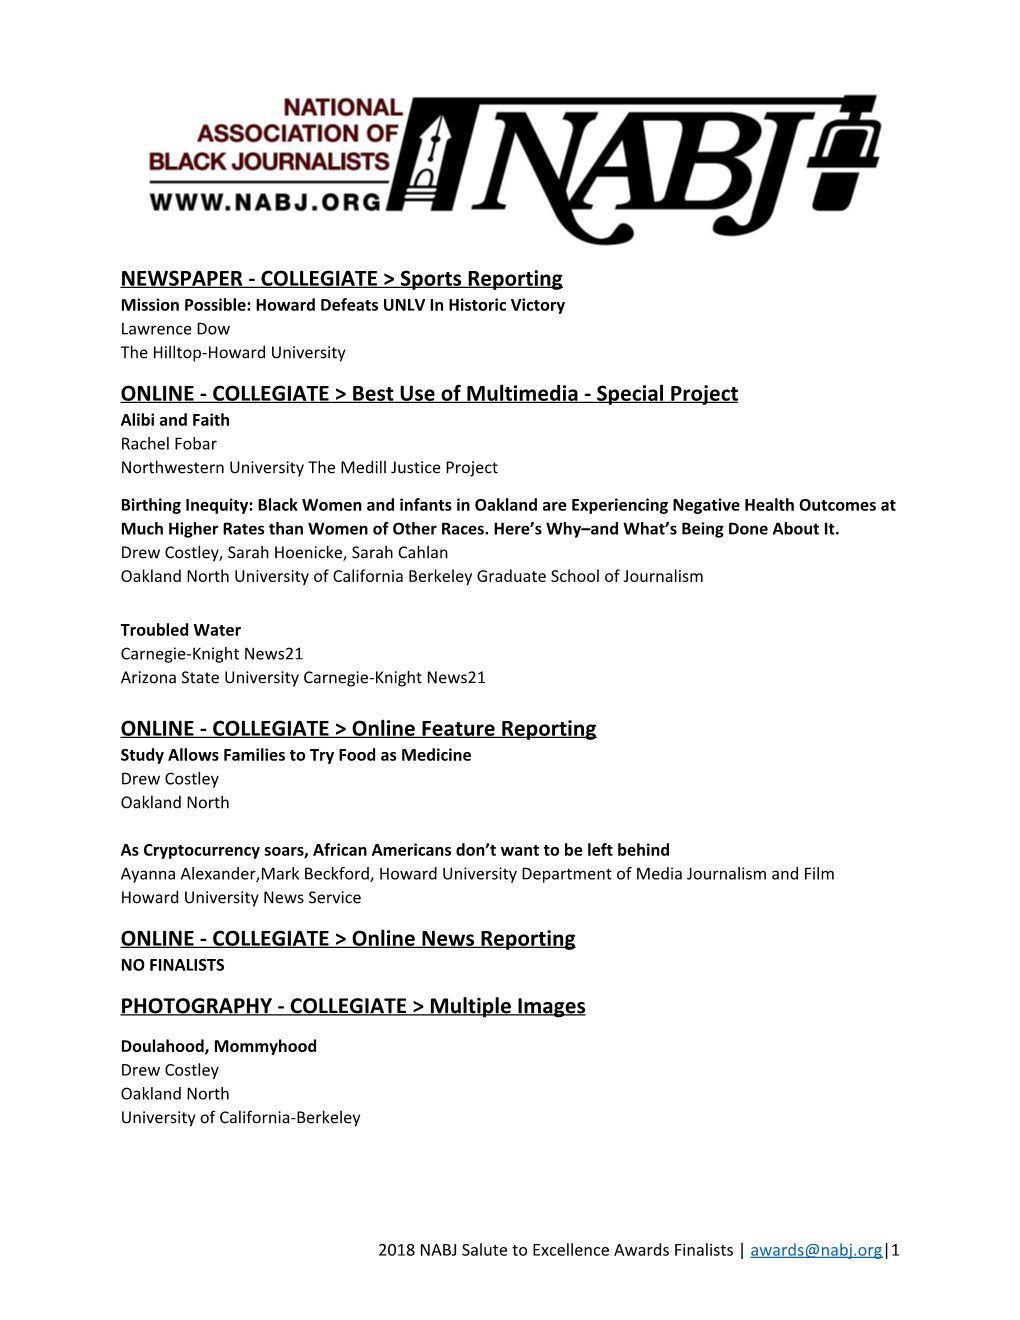 2018 NABJ Salute to Excellence Awards Finalists | Awards@Nabj.Org|1 ​ ​